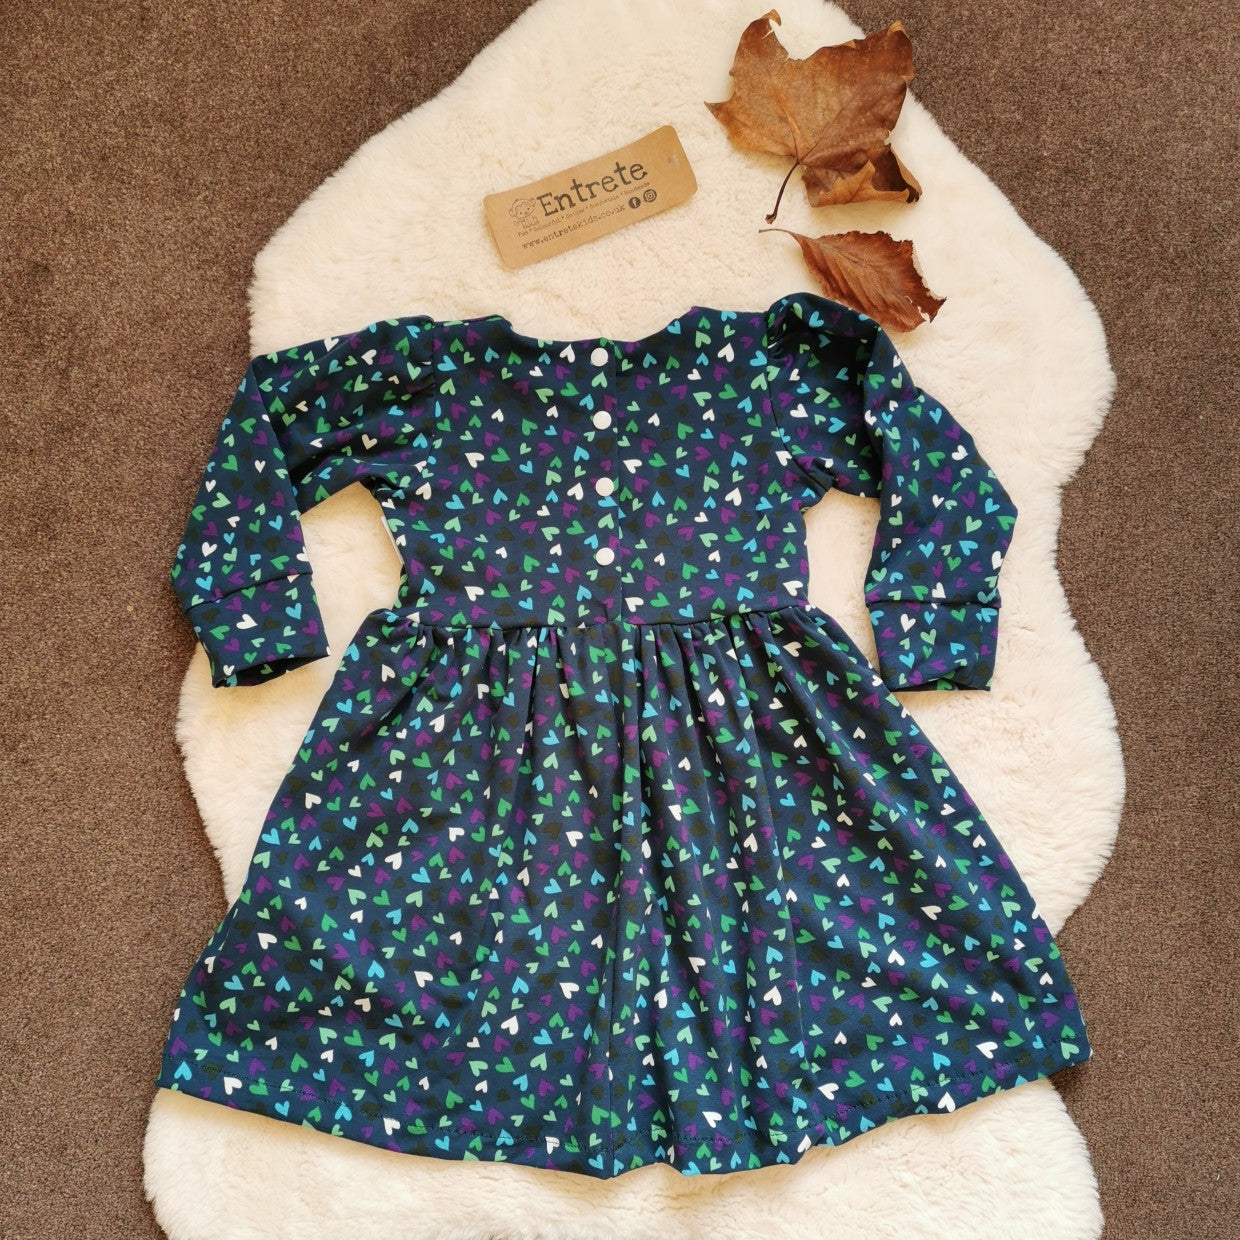 Girls & Babies back popper dress. Handmade in teal mini hearts cotton jersey. Rear view showing popper entry down to the waist available on sizes 9-12 months and above.